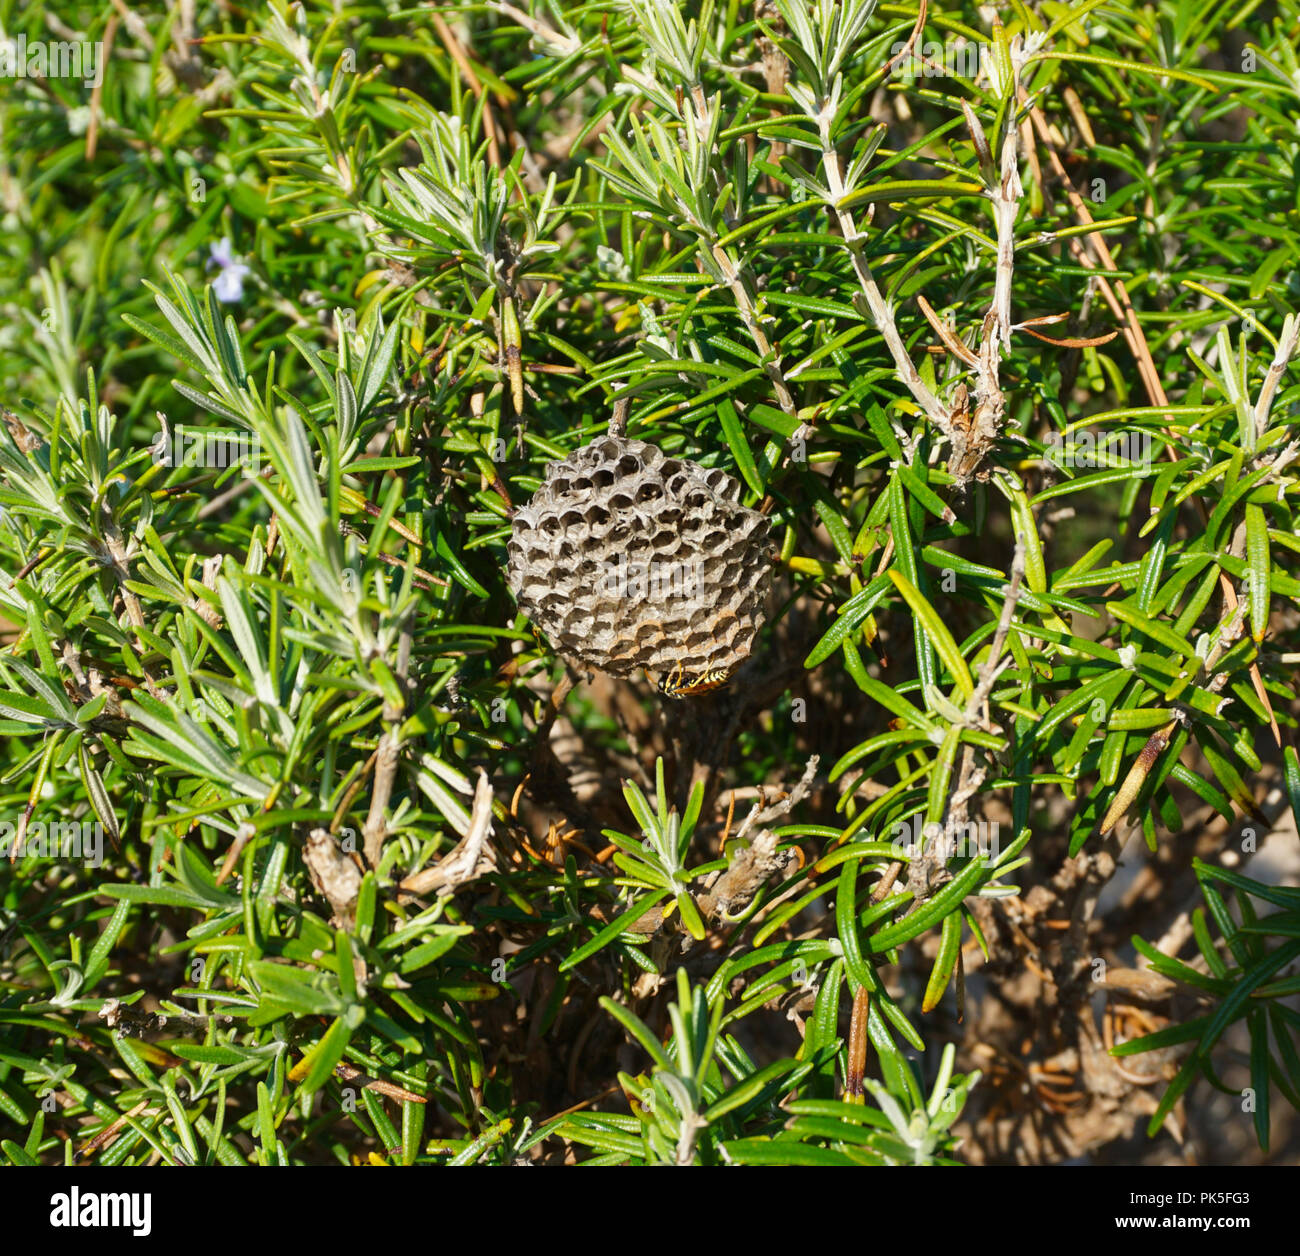 Vespiary in the middle of the green bush of rosemary with wasps Vespula Vulgaris Stock Photo